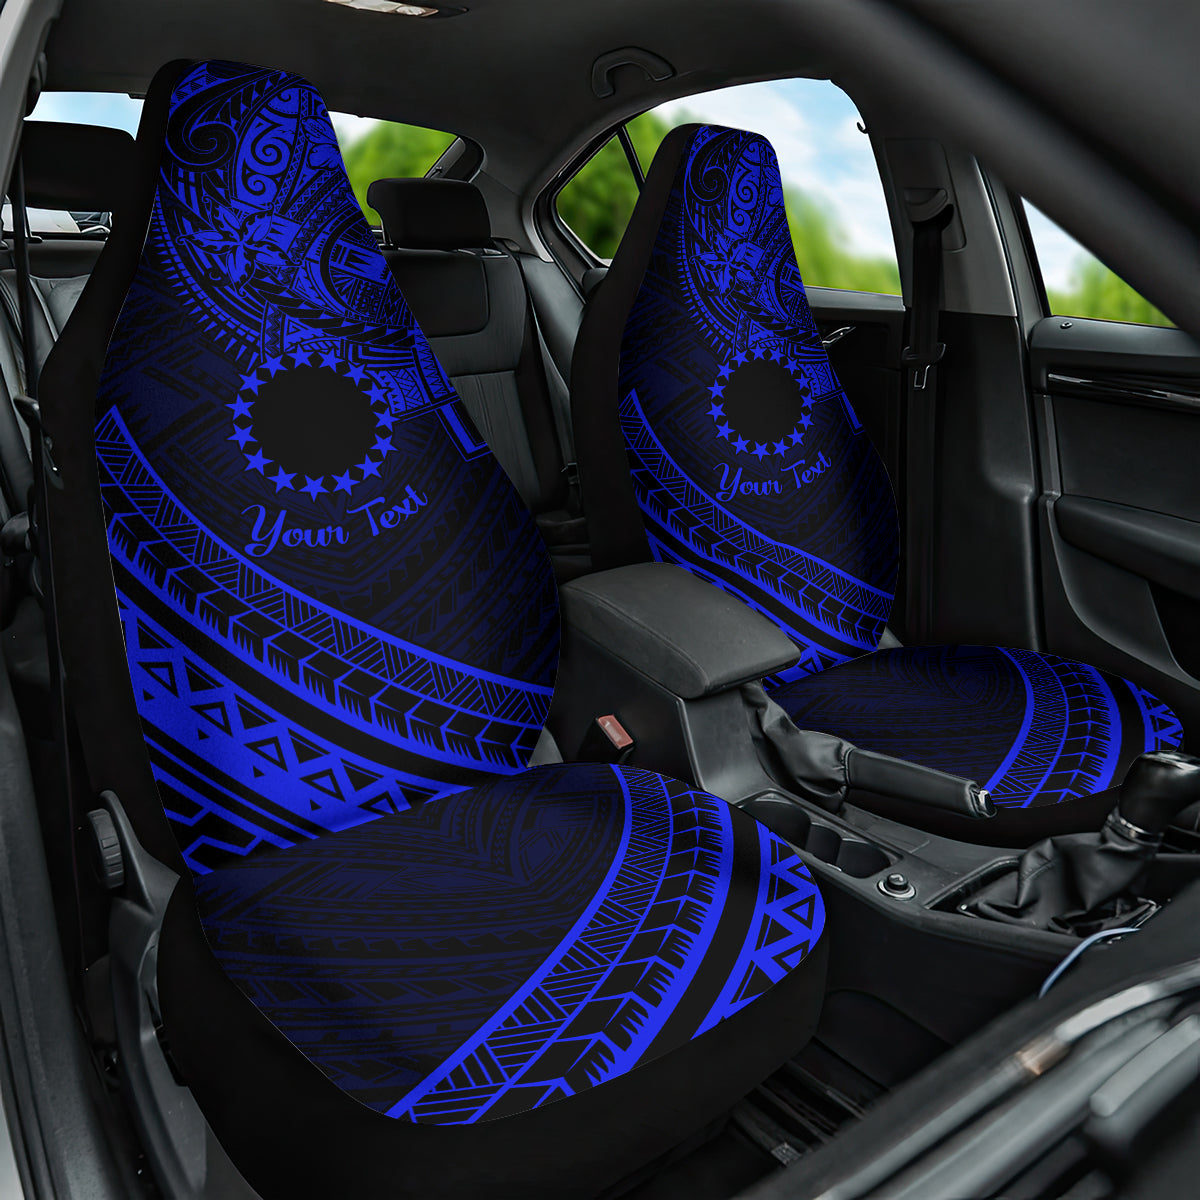 Kia Orana Cook Islands Car Seat Cover Circle Stars With Floral Navy Blue Pattern LT01 One Size Blue - Polynesian Pride